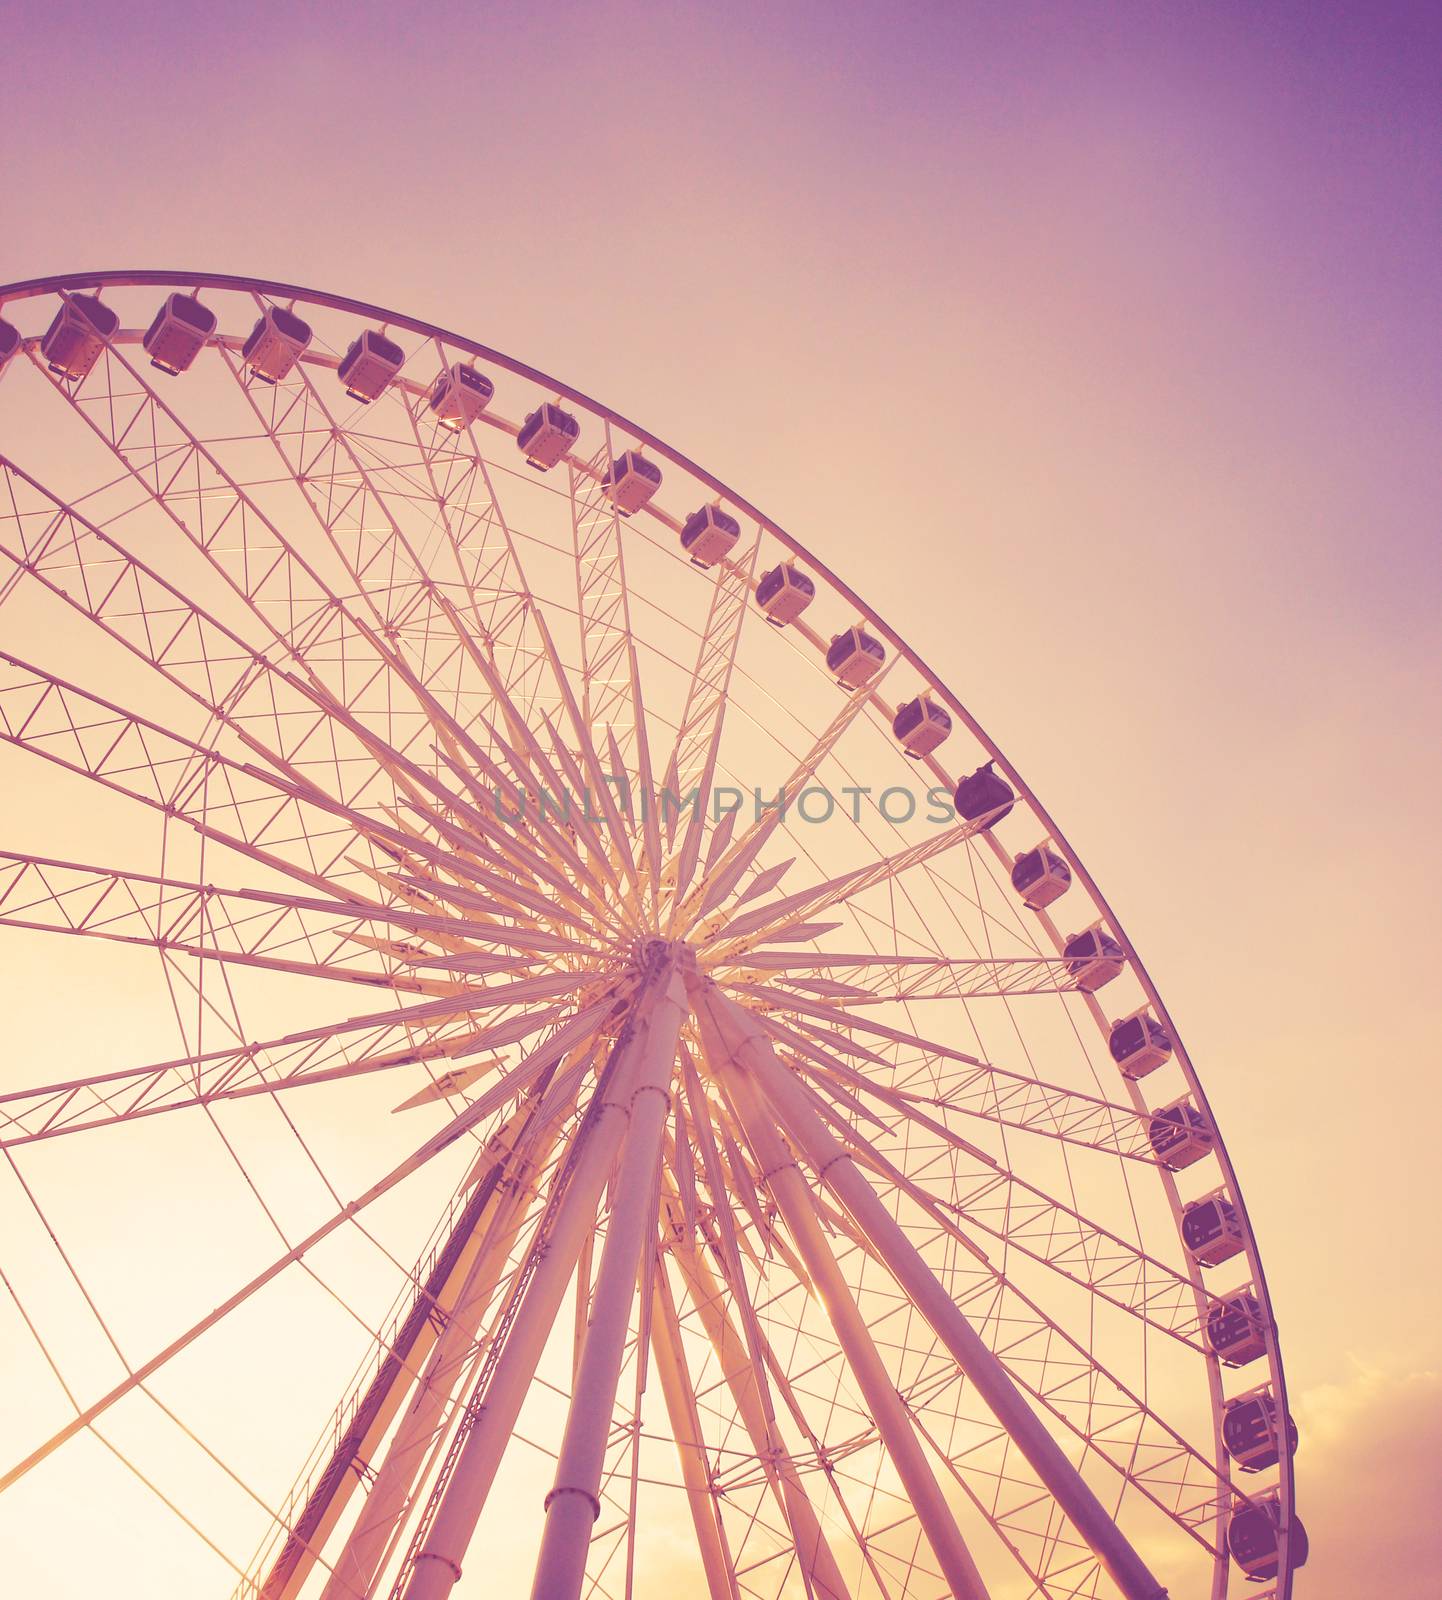 Ferris wheel with blue sky with retro effect